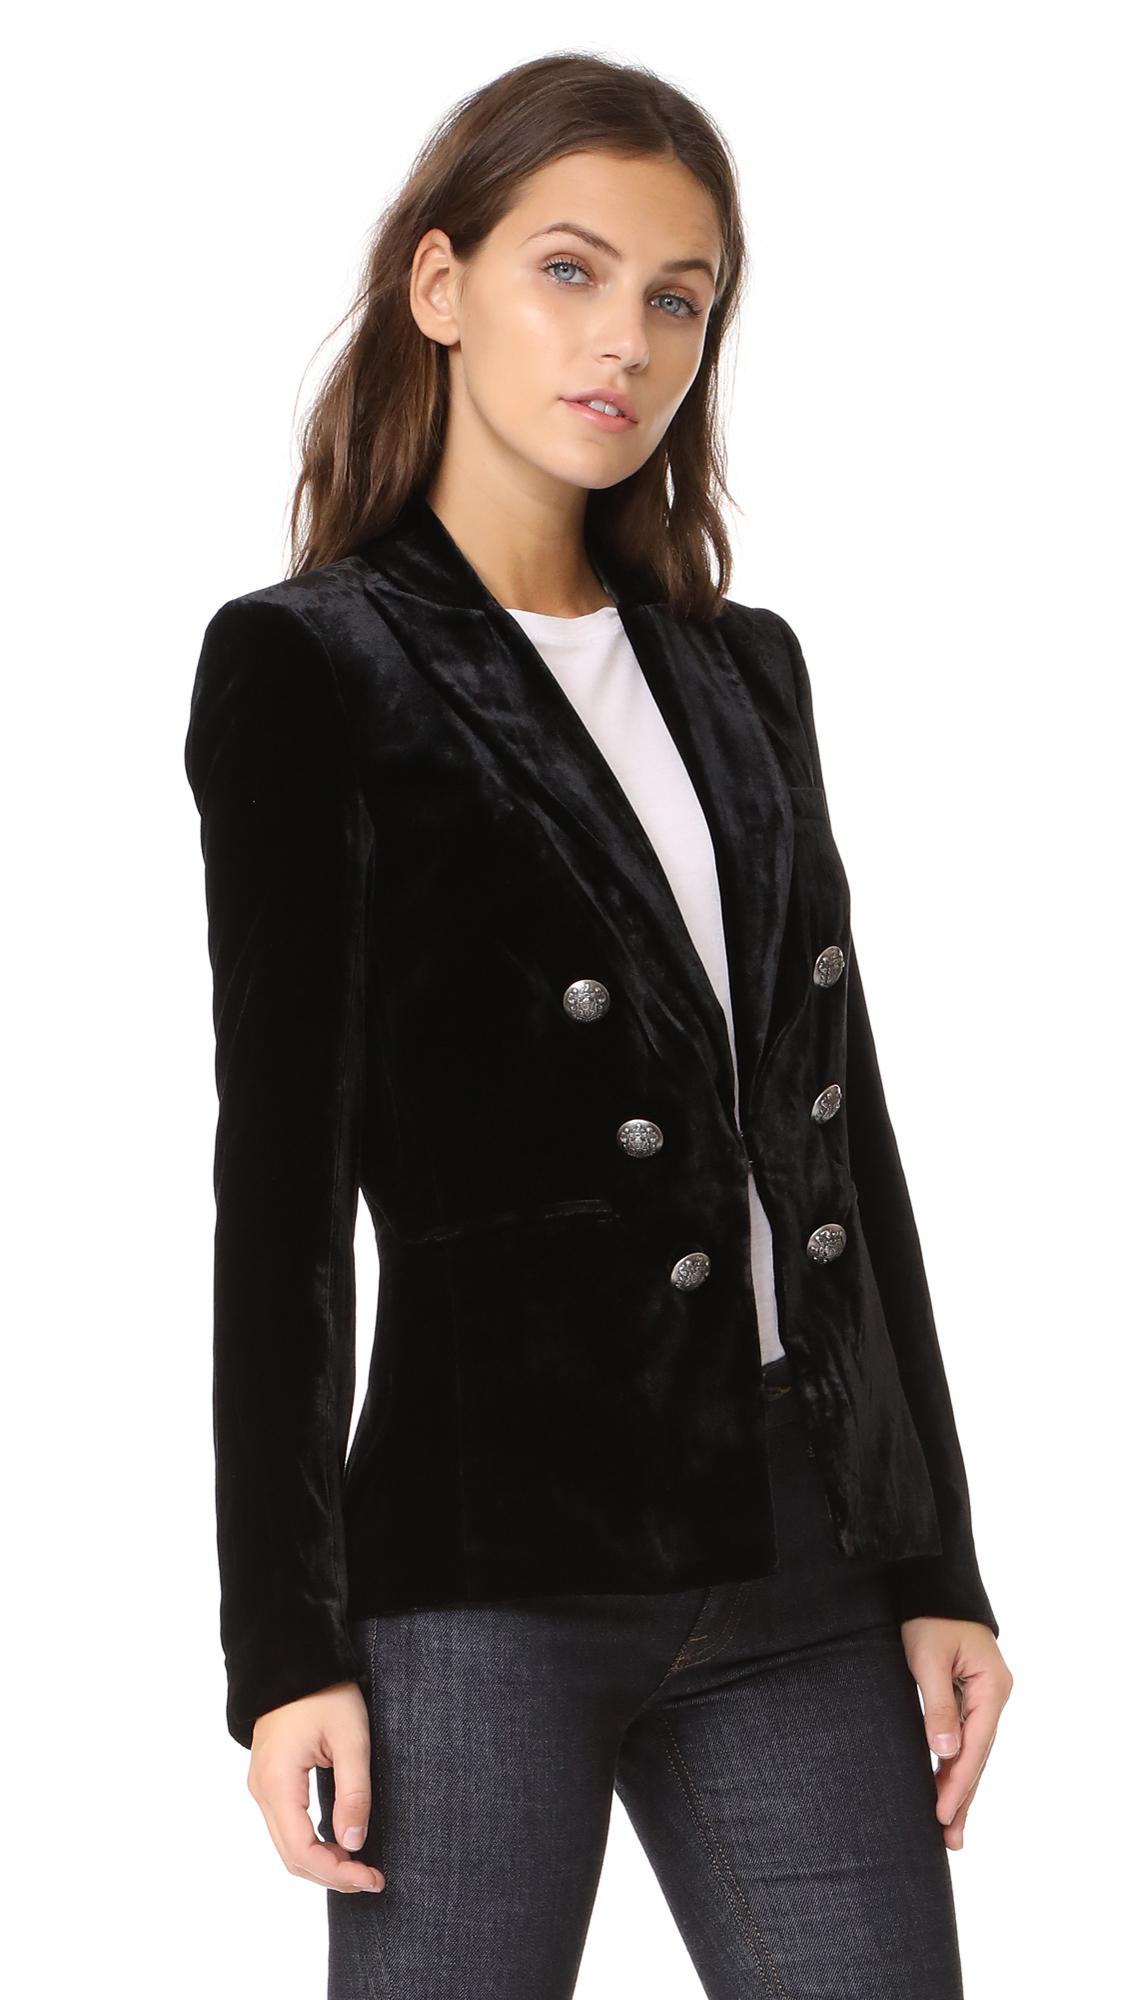 Lyst - Veronica Beard Briar Double Breasted Jacket in Black